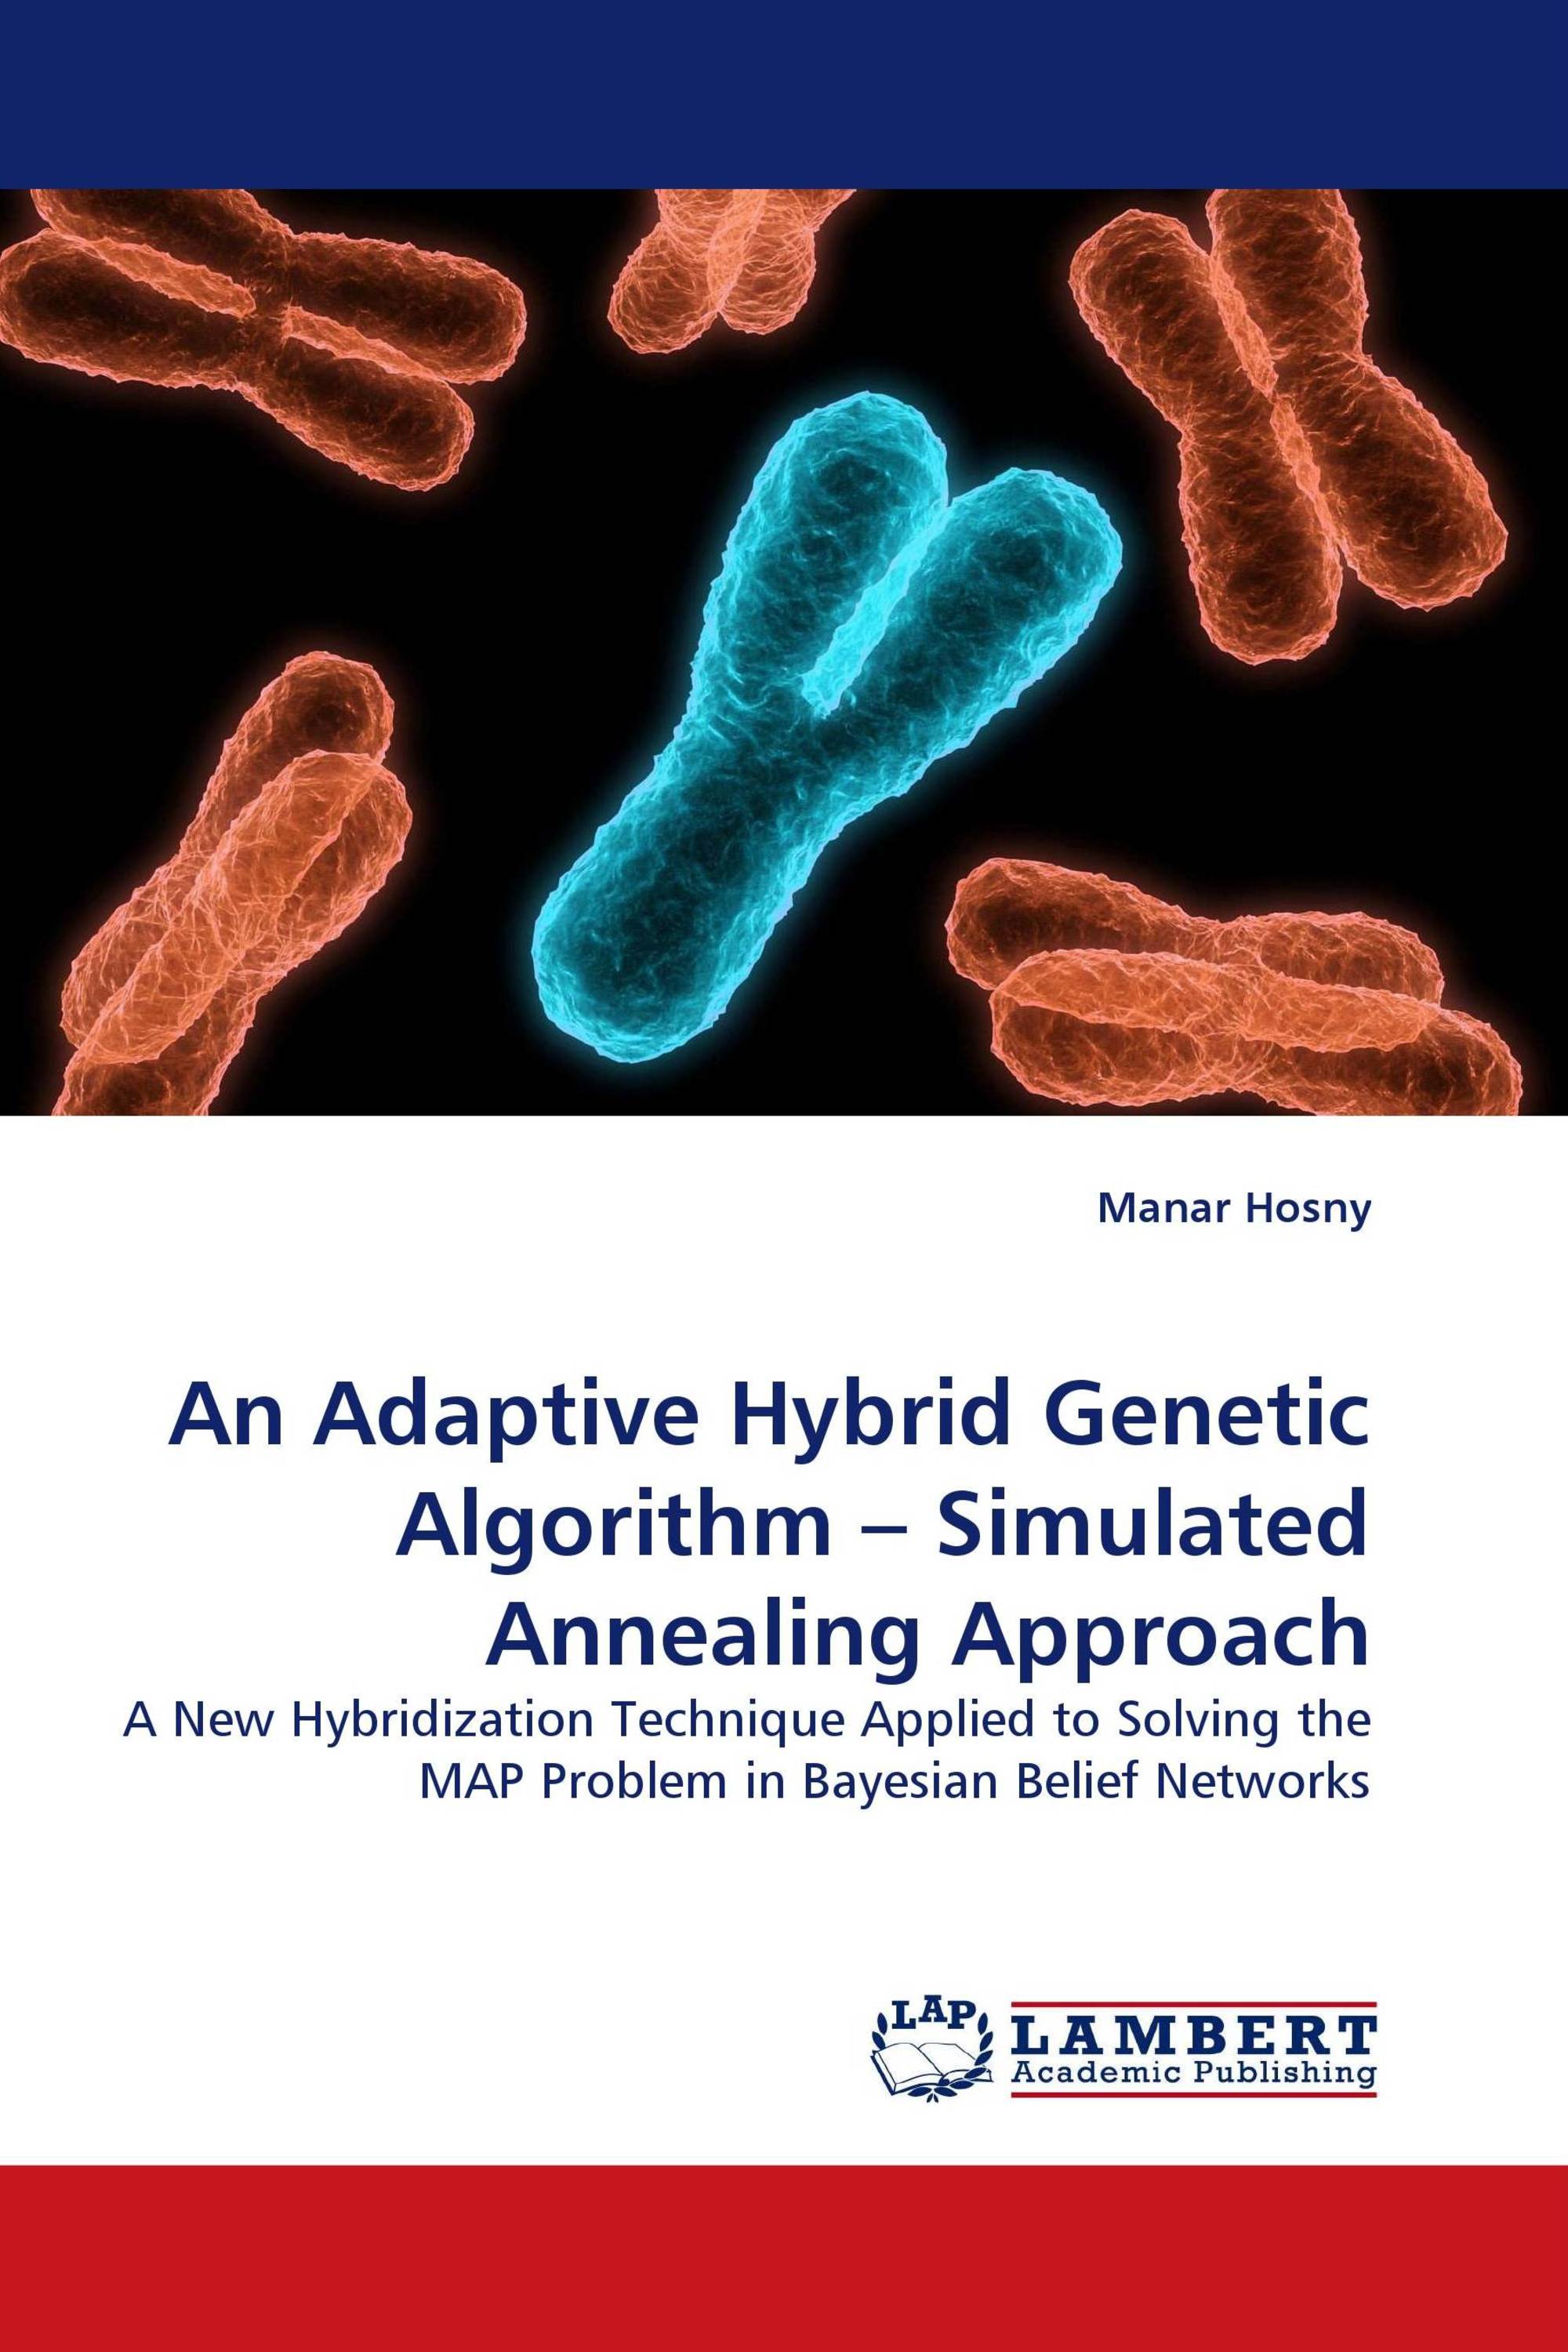 An Adaptive Hybrid Genetic Algorithm – Simulated Annealing Approach